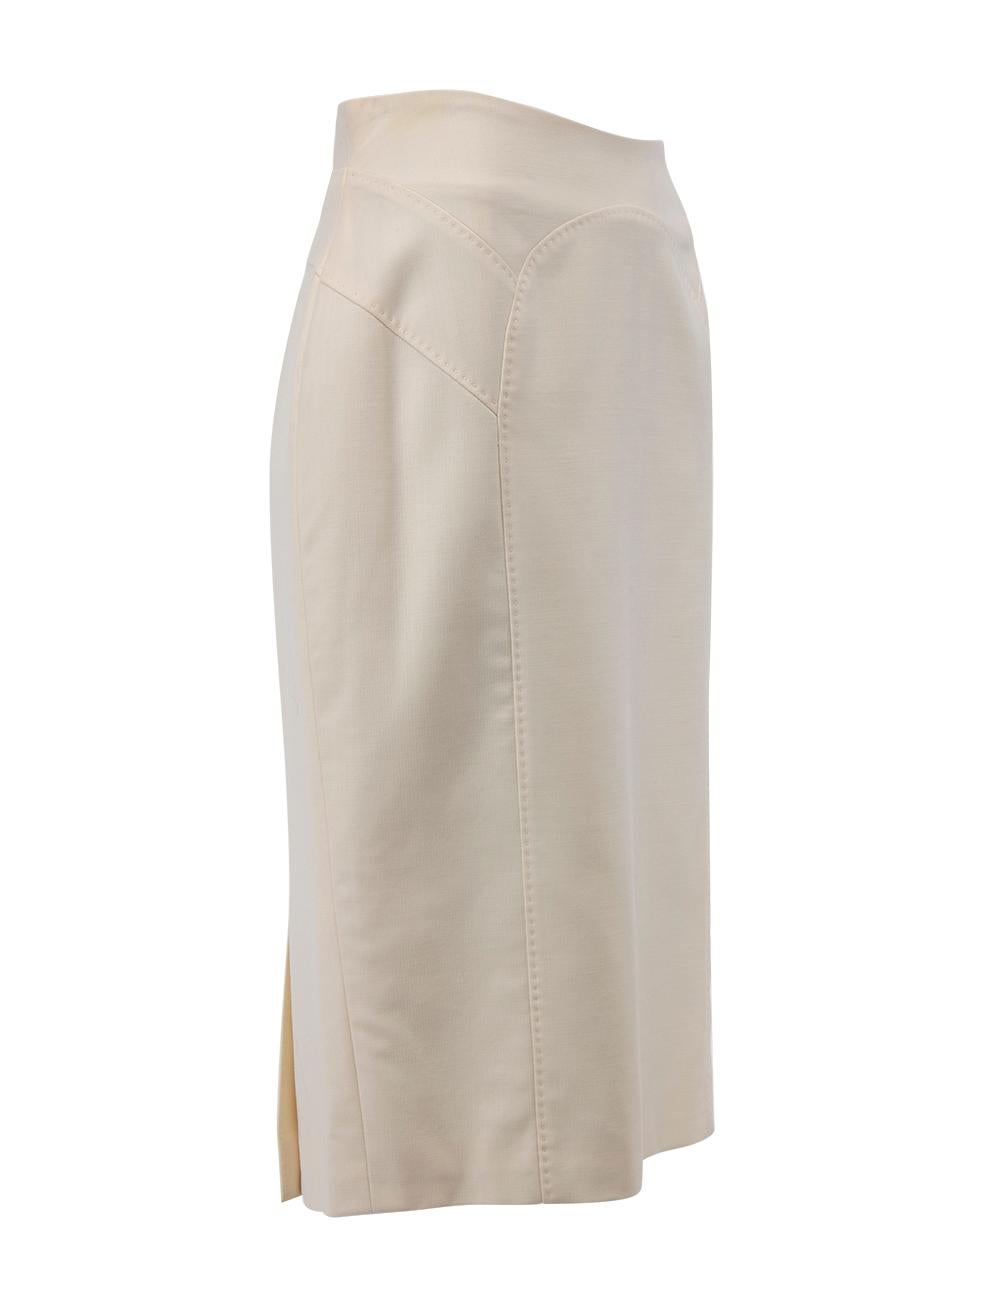 CONDITION is Very good. Hardly any visible wear to skirt is evident on this used Amanda Wakeley designer resale item. Details Cream Wool Pencil skirt Knee length Side zip closure with hook and eye Double vent on back Fully lined with silk Made in